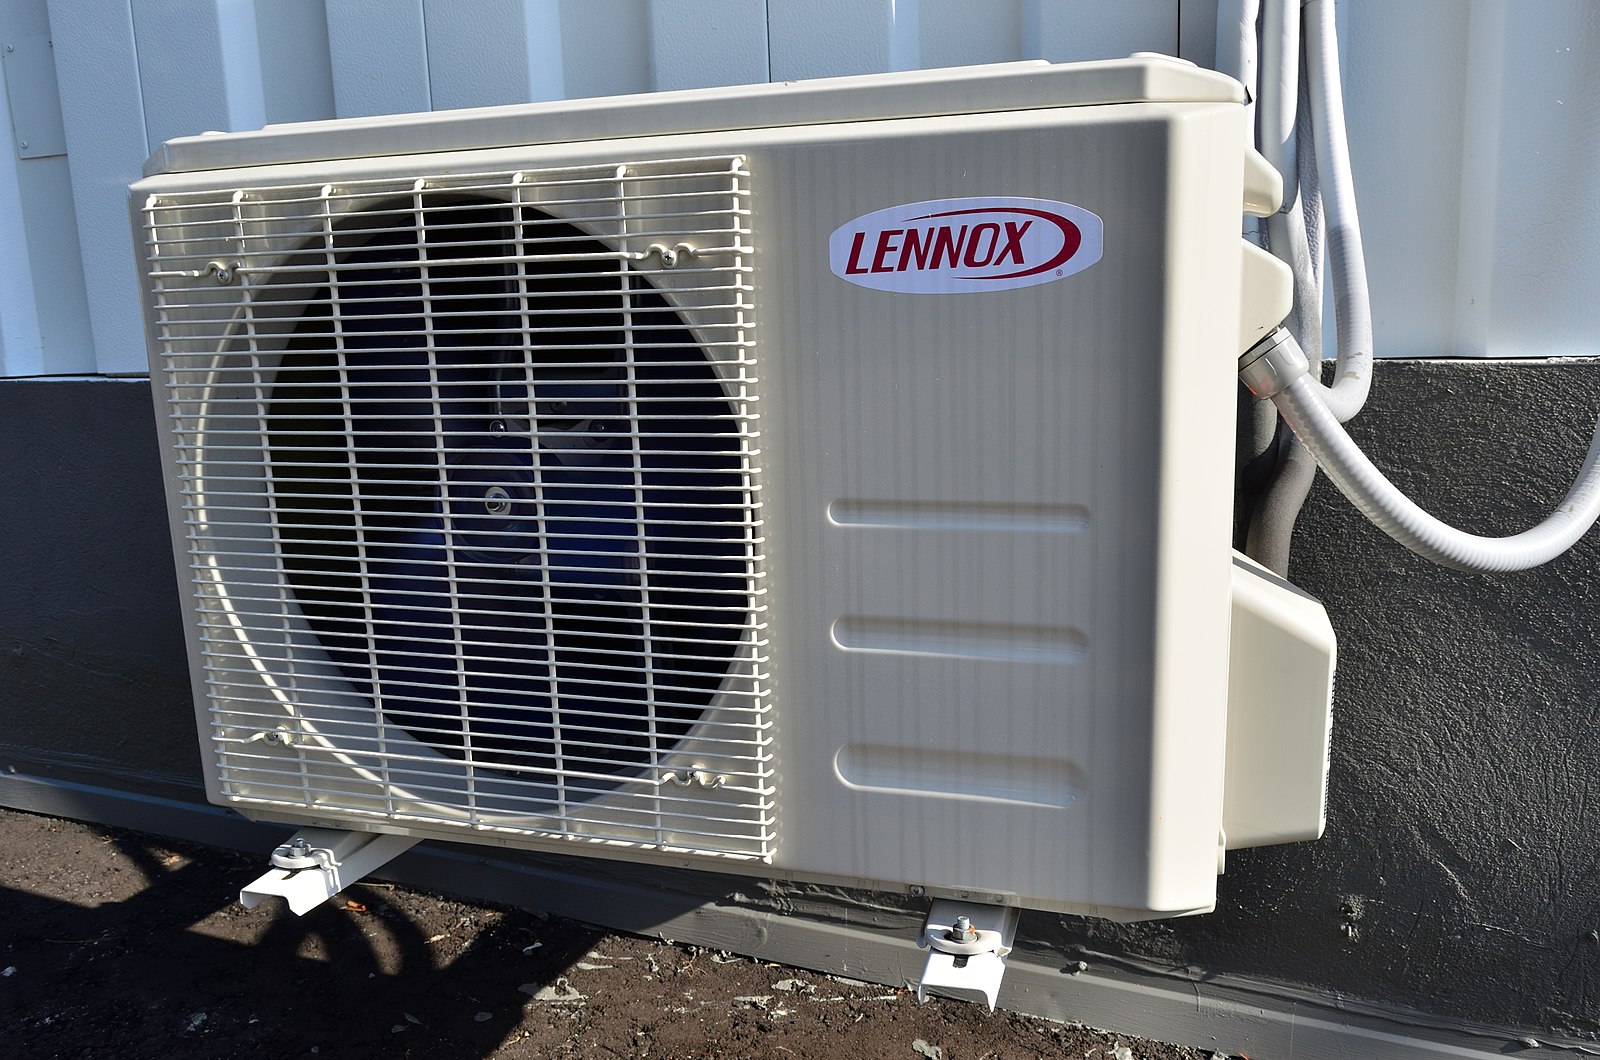 how to turn off light on Lennox  air conditioner